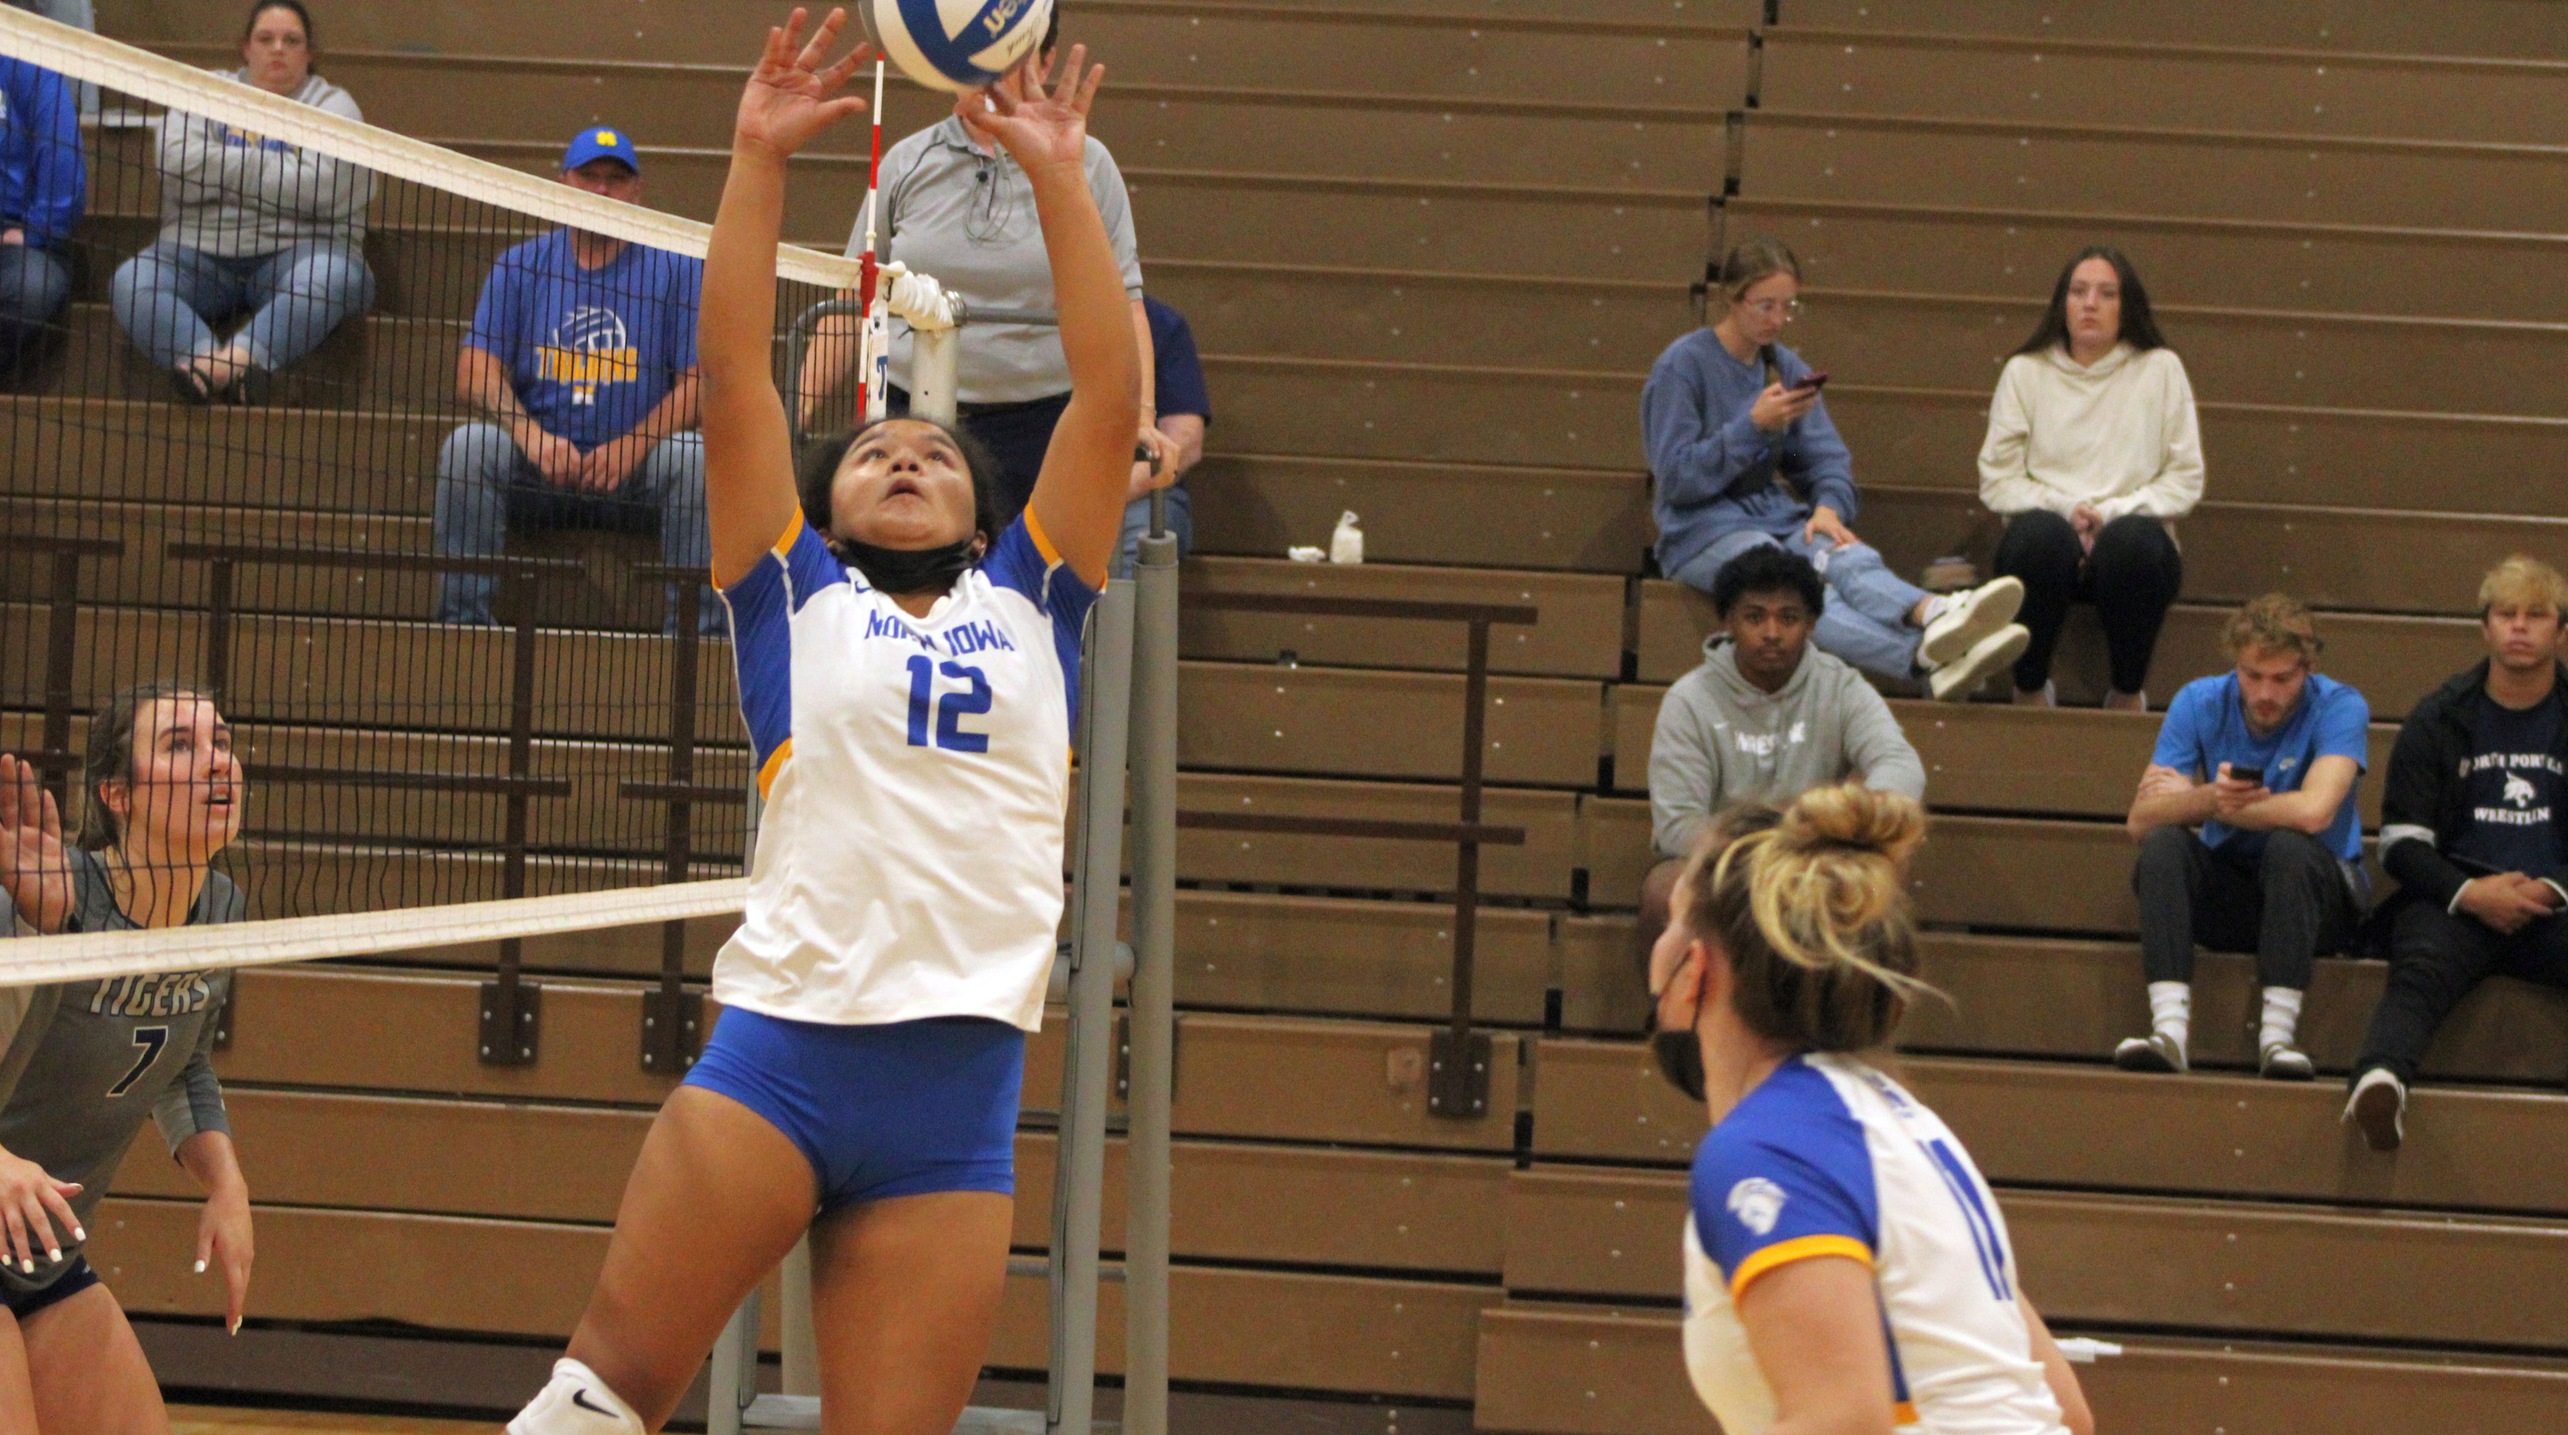 NIACC's Iwalani Beltran sets the ball during Friday's match against Marshalltown CC.